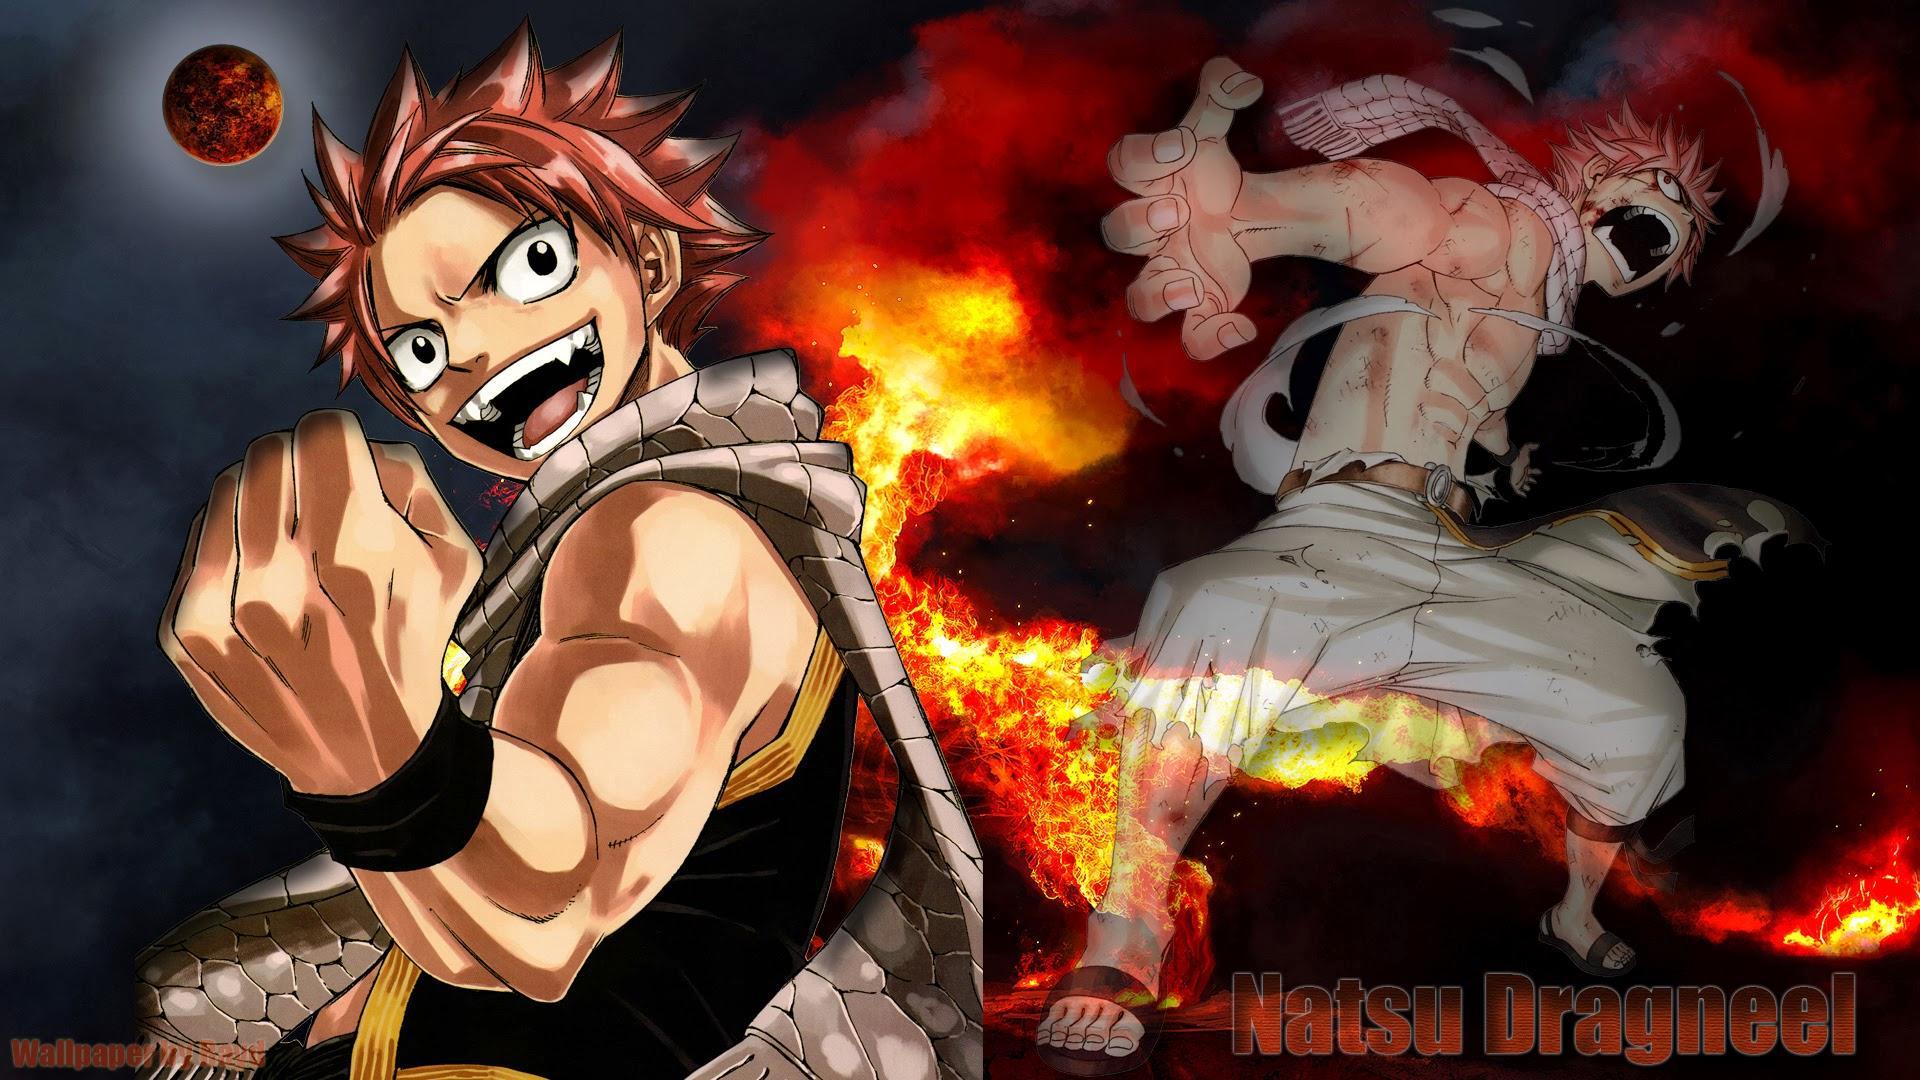 Which Fairy Tail Anime Character are you? - Personality Quiz